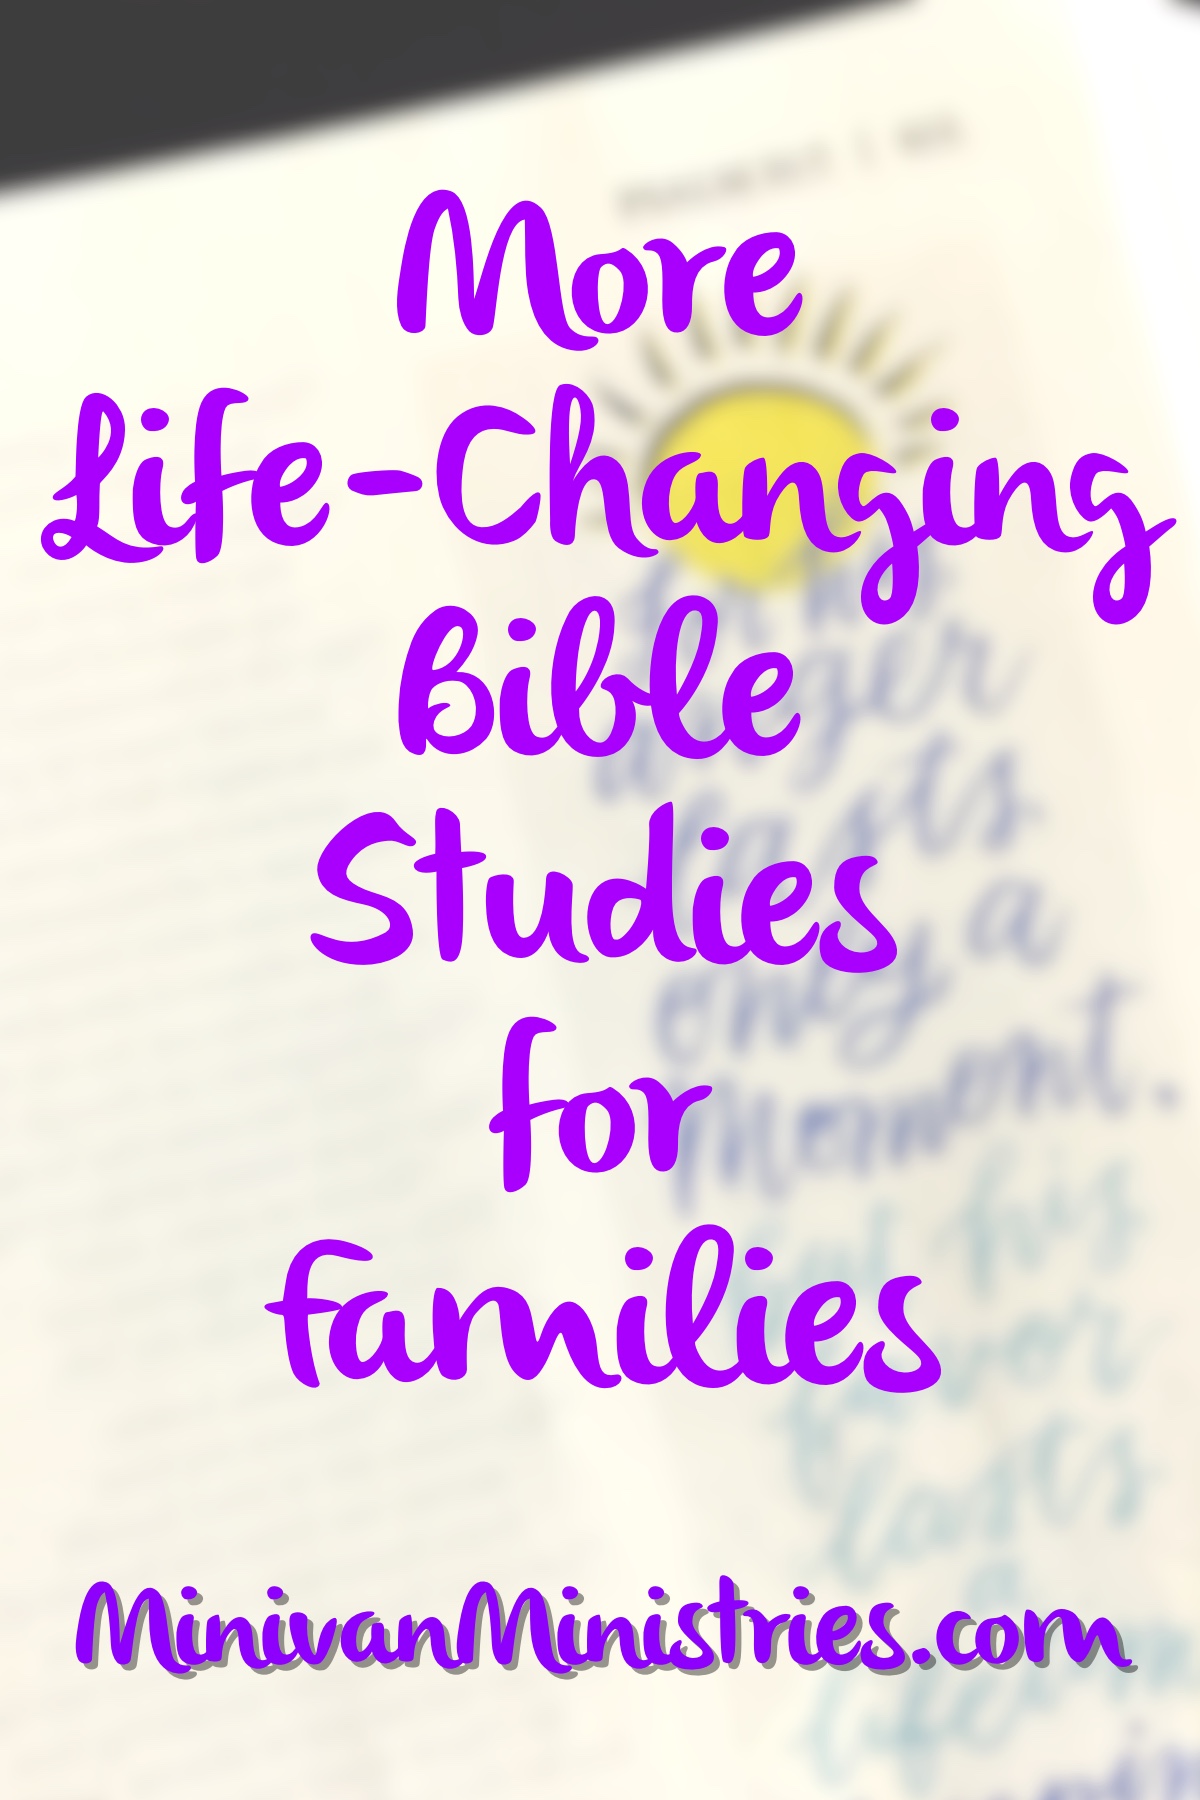 More life-changing Bible studies for families